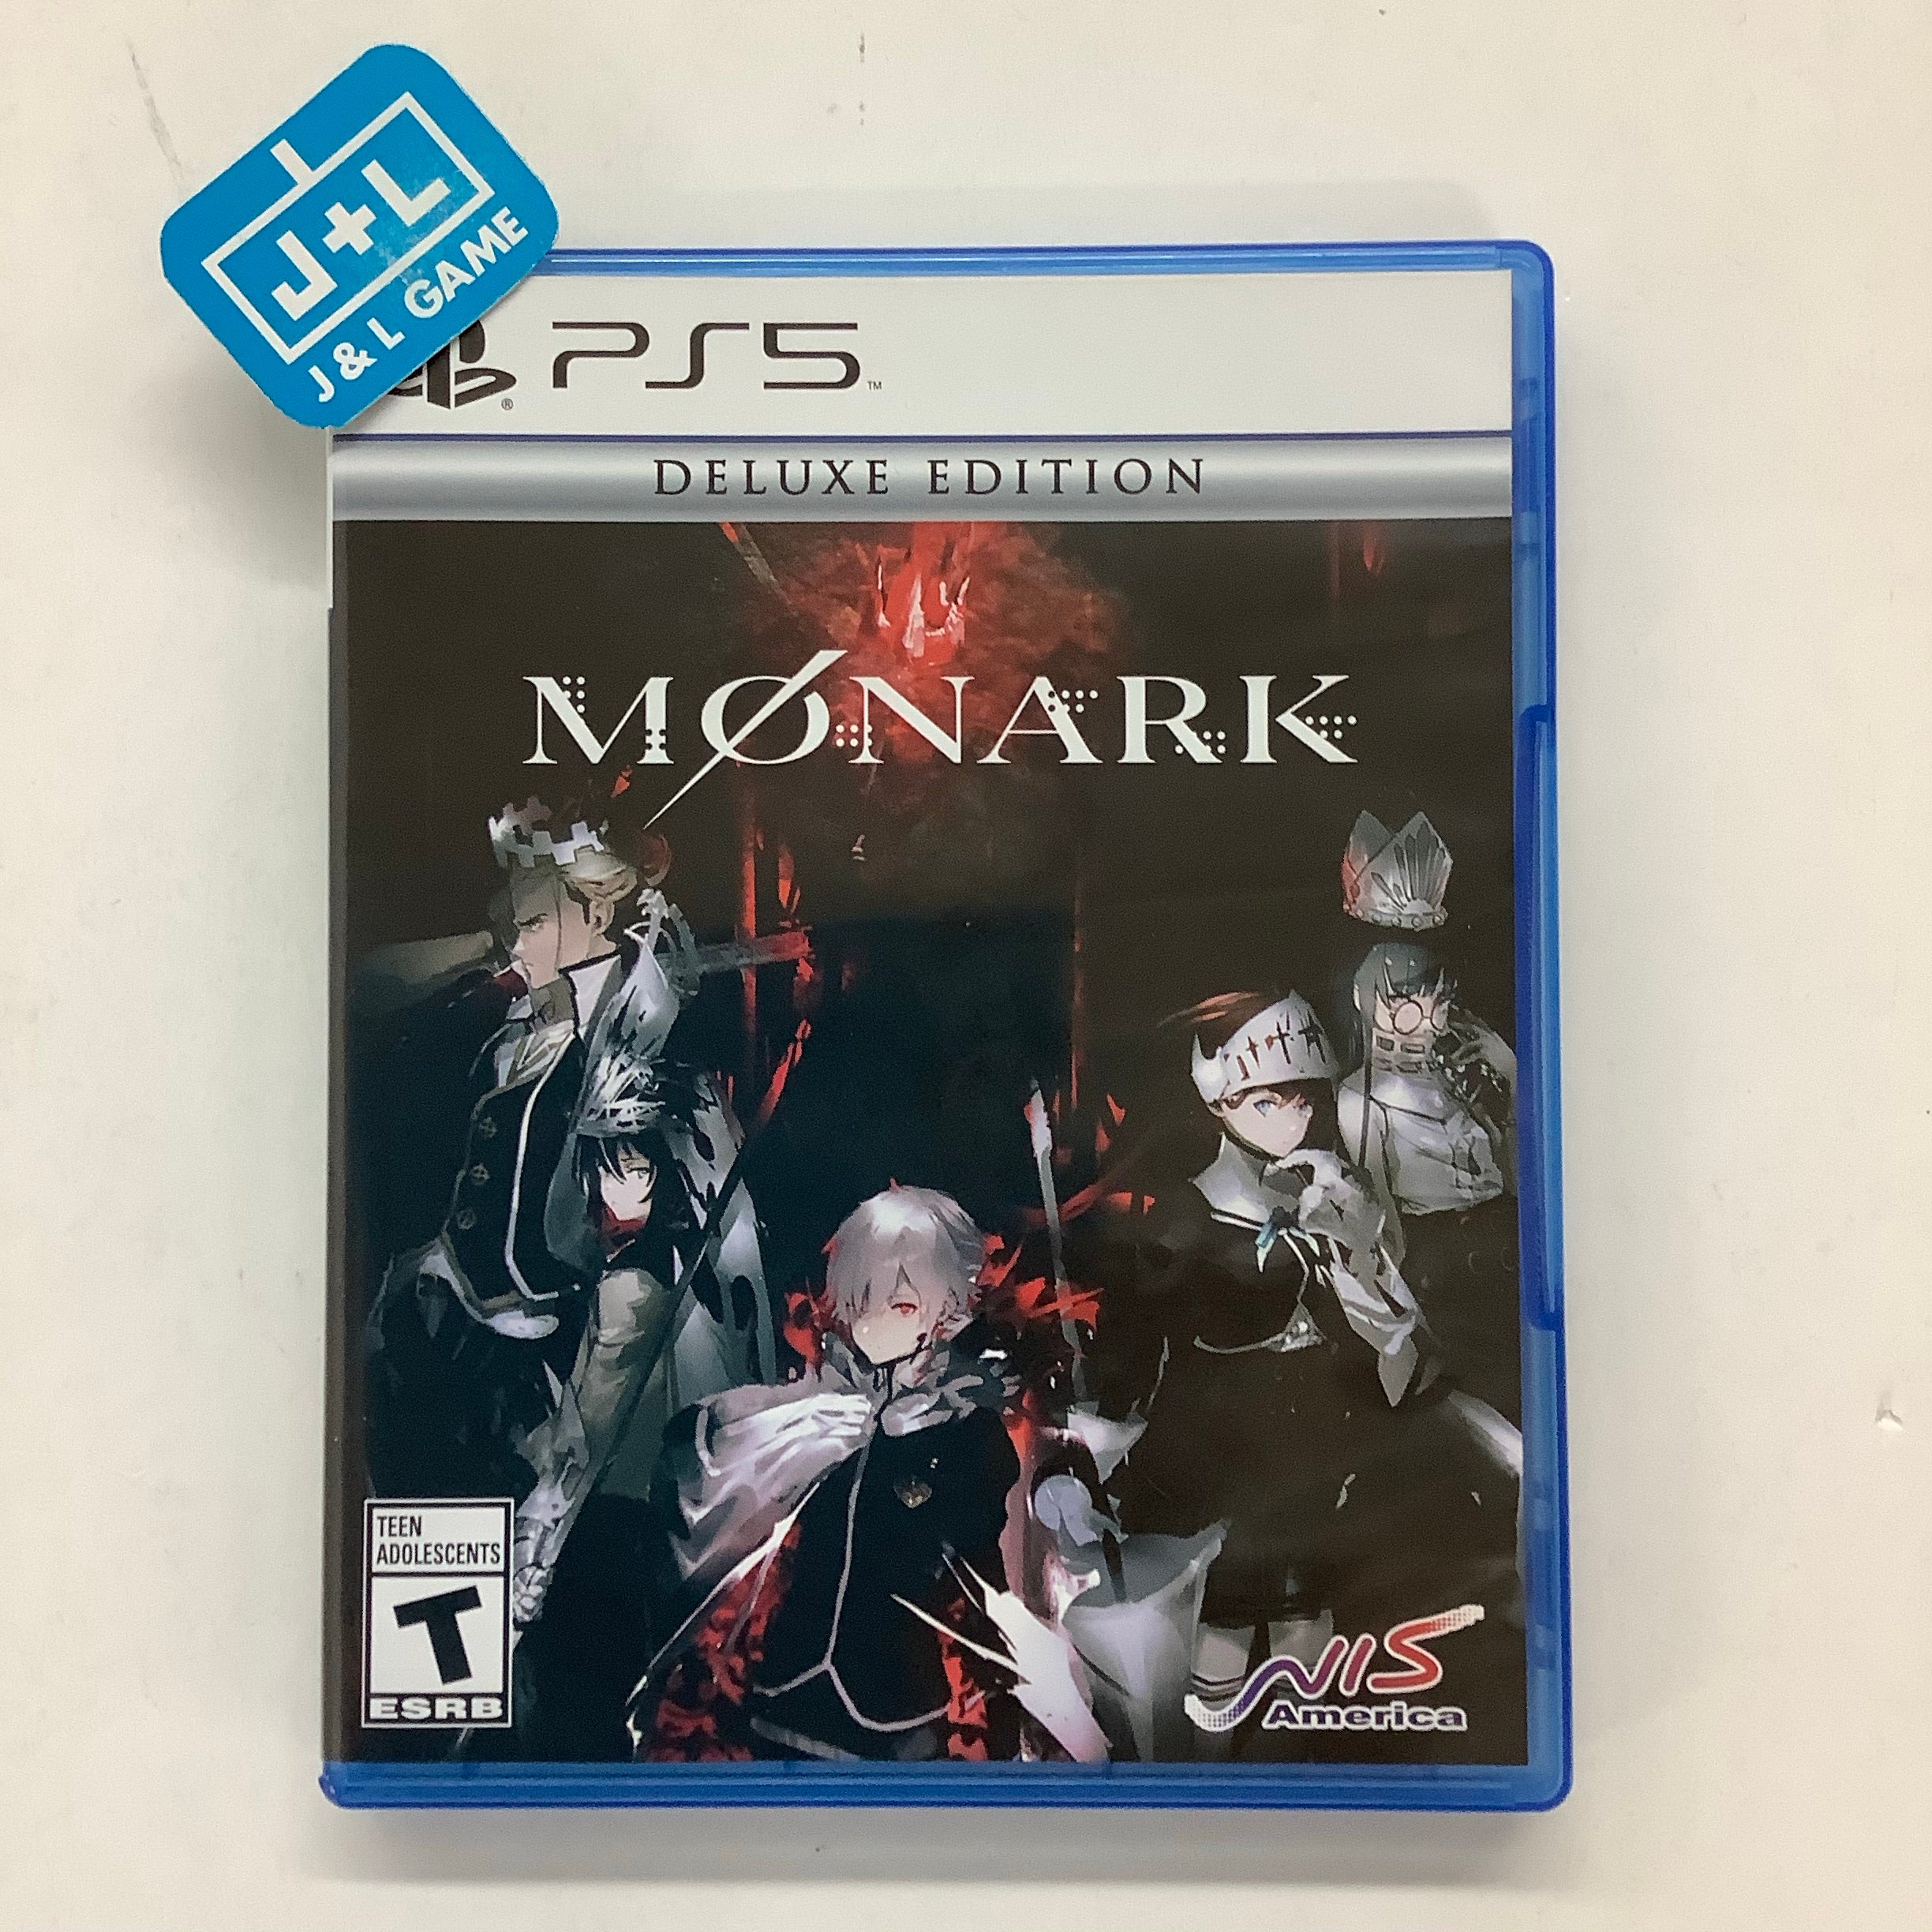 Monark: Deluxe Edition - (PS5) PlayStation 5 [UNBOXING] Video Games NIS America   